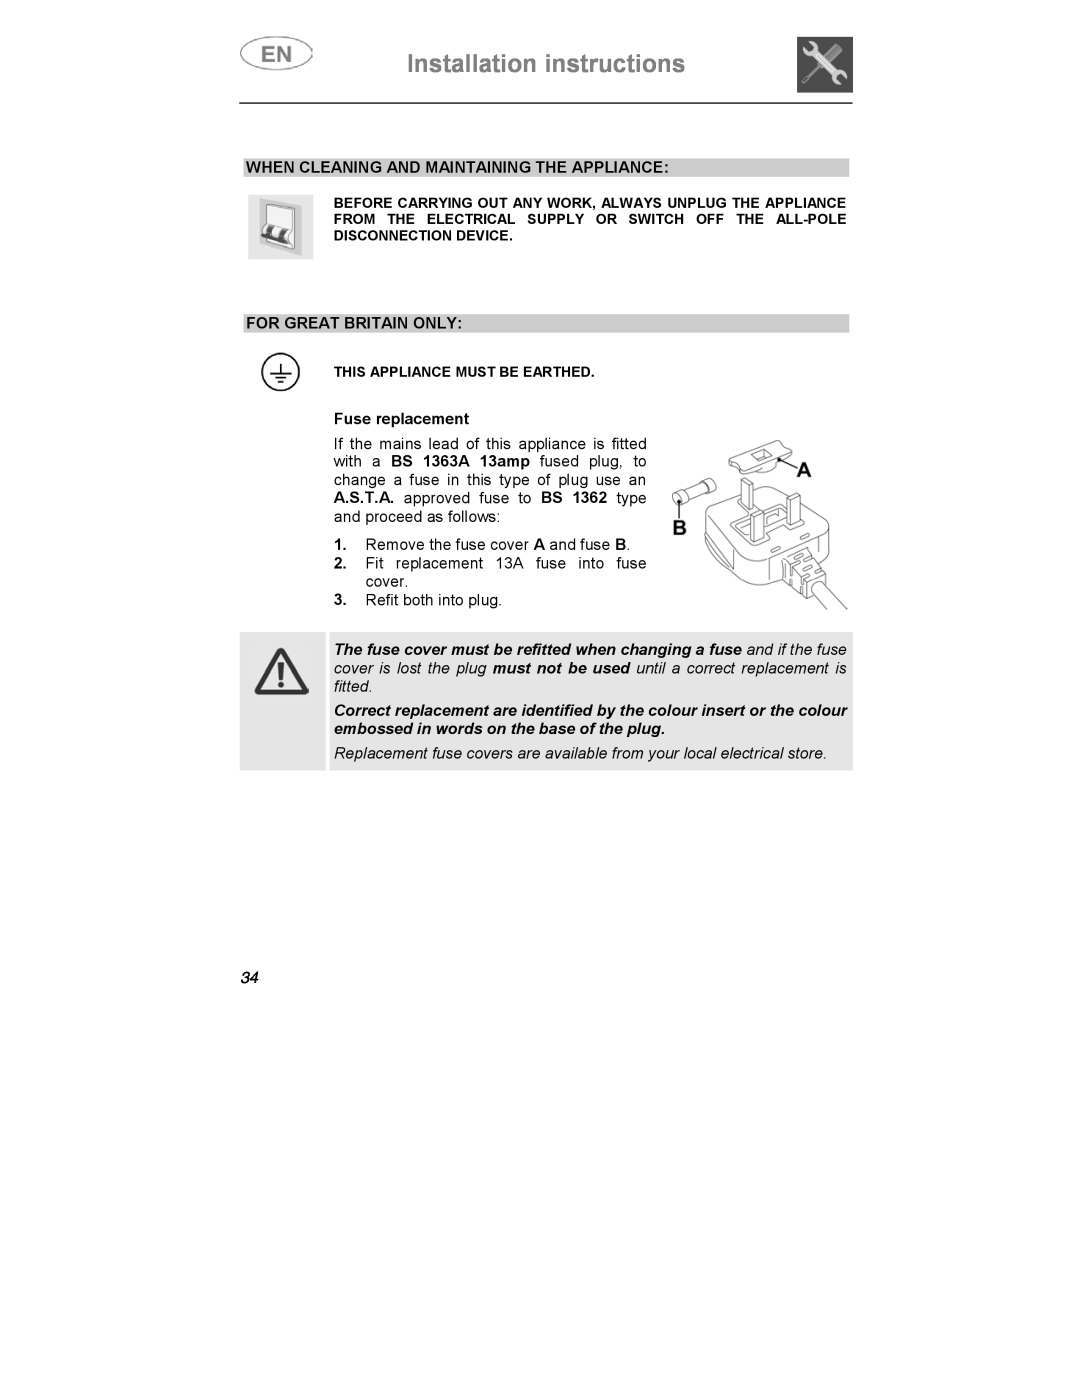 Smeg CA01-3 Installation instructions, When Cleaning And Maintaining The Appliance, For Great Britain Only 